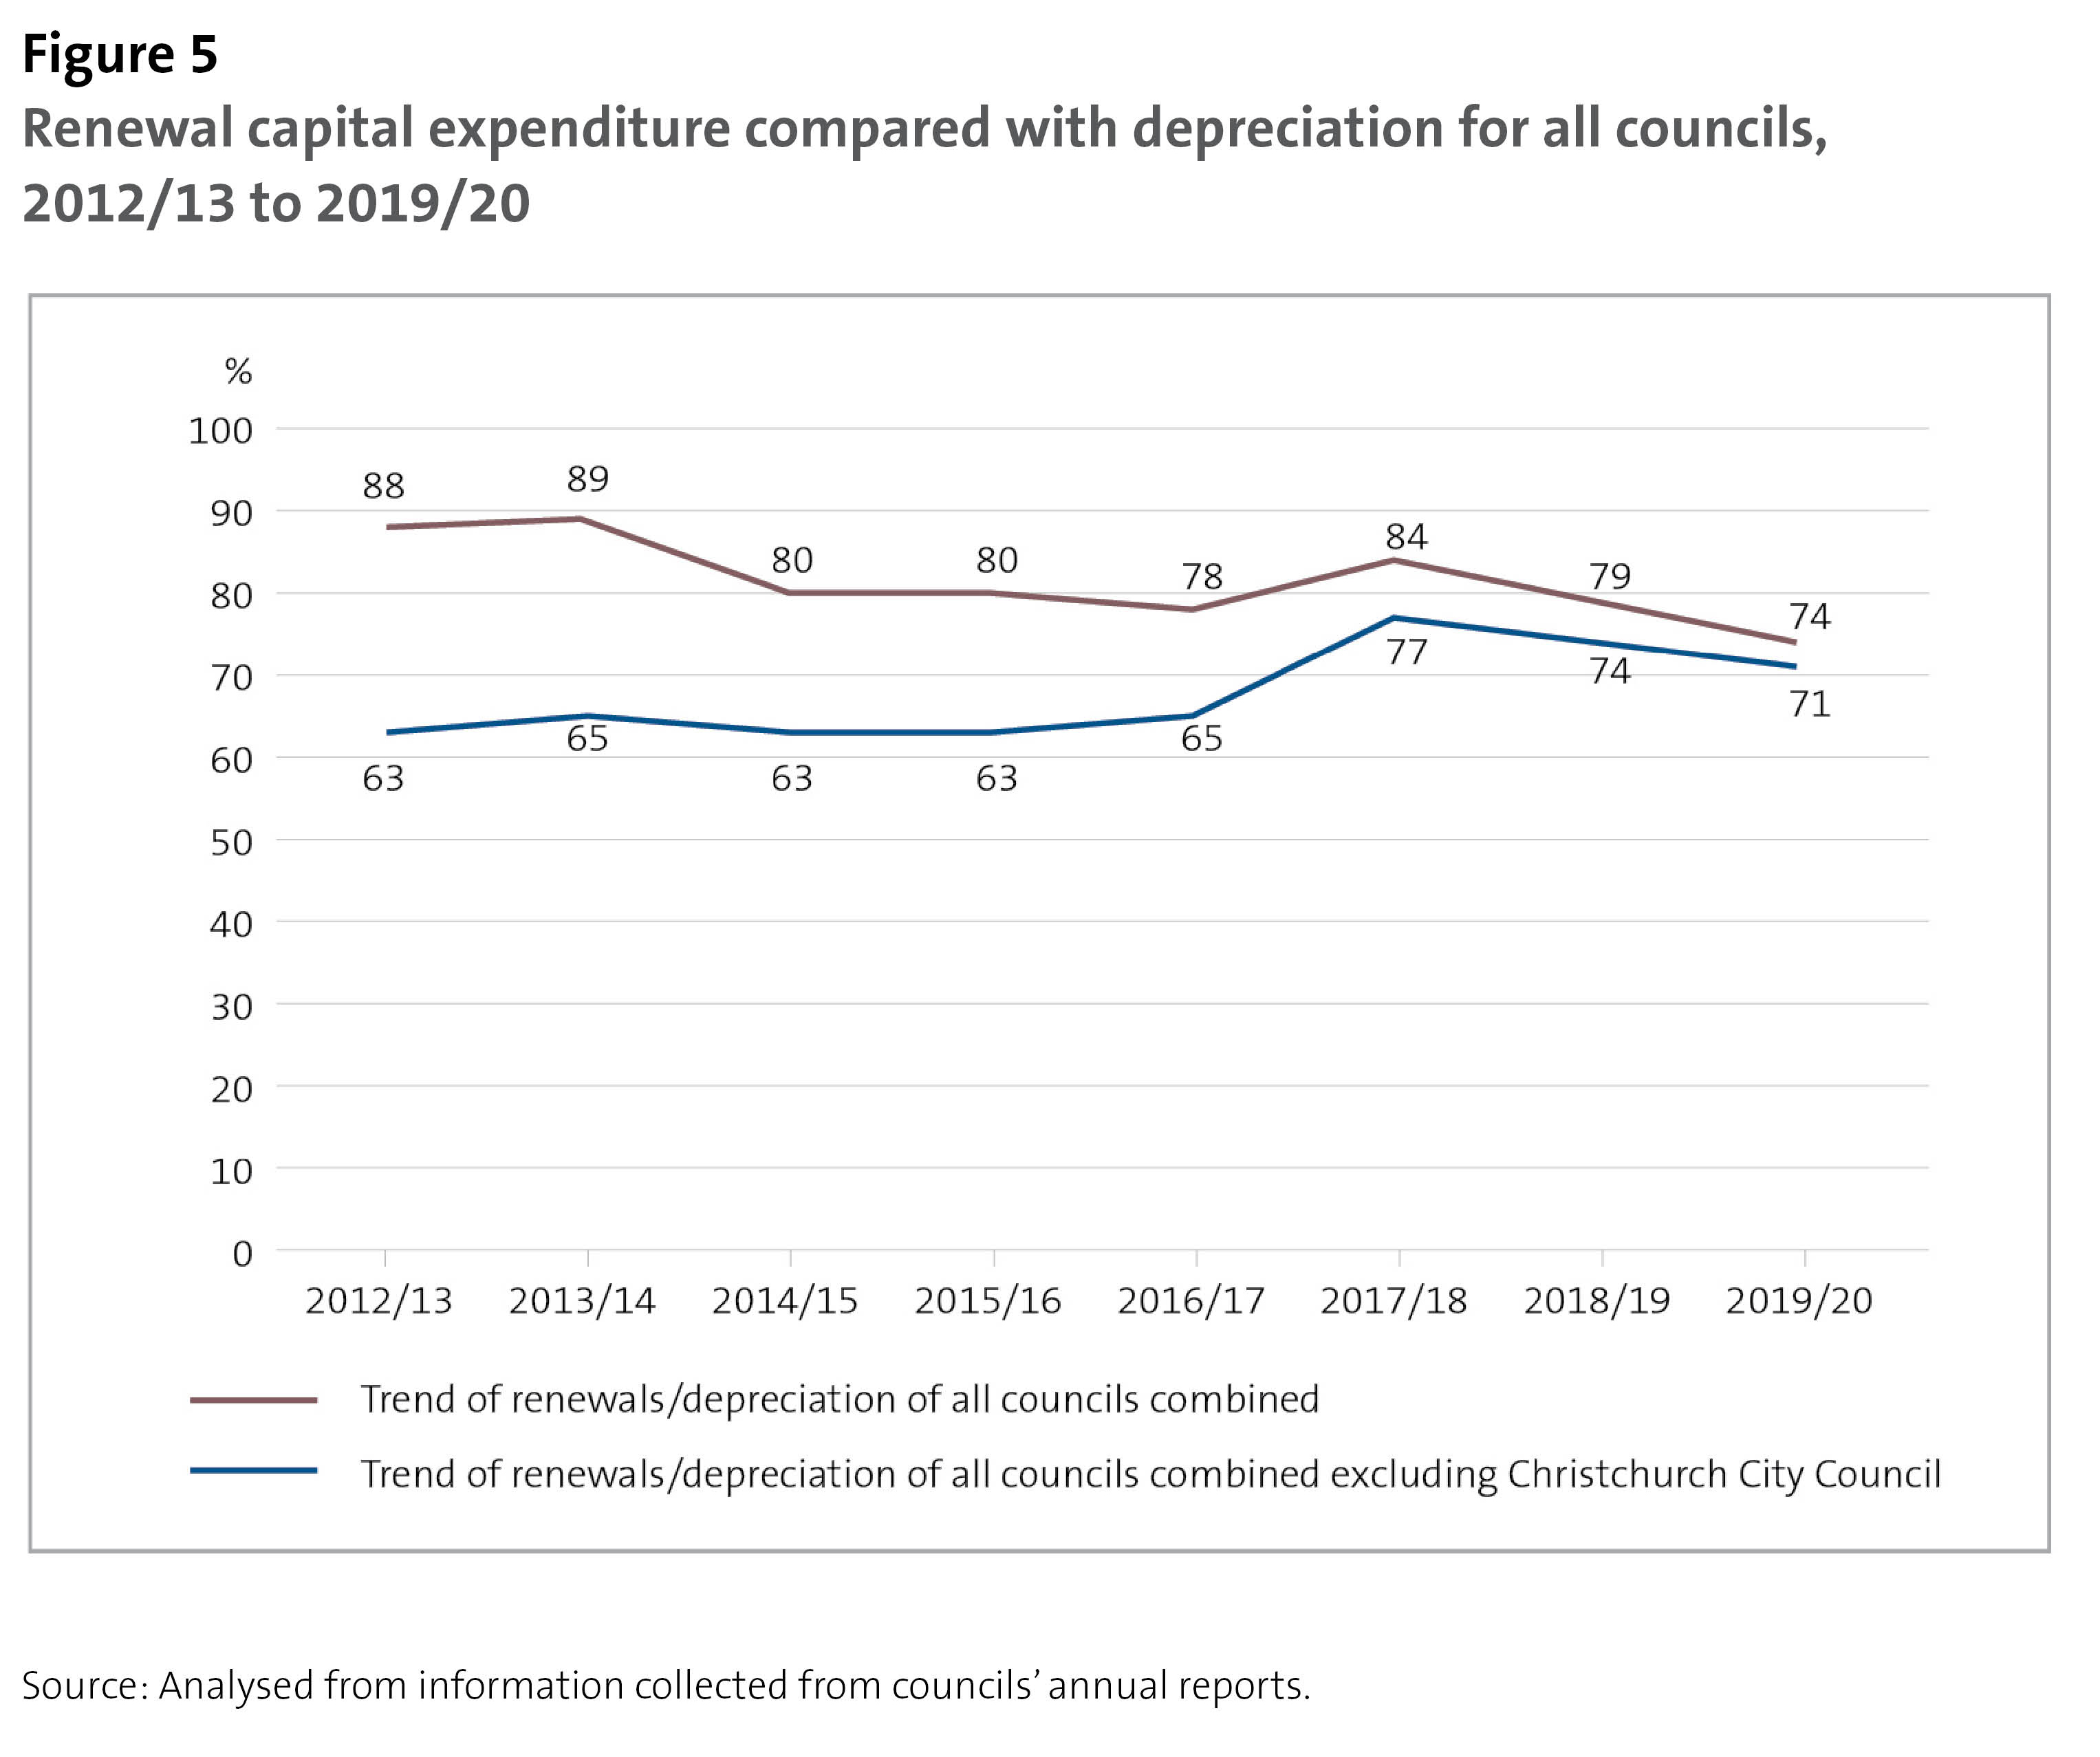 Figure 5 - Renewal capital expenditure compared with depreciation for all councils, 2012/13 to 2019/20